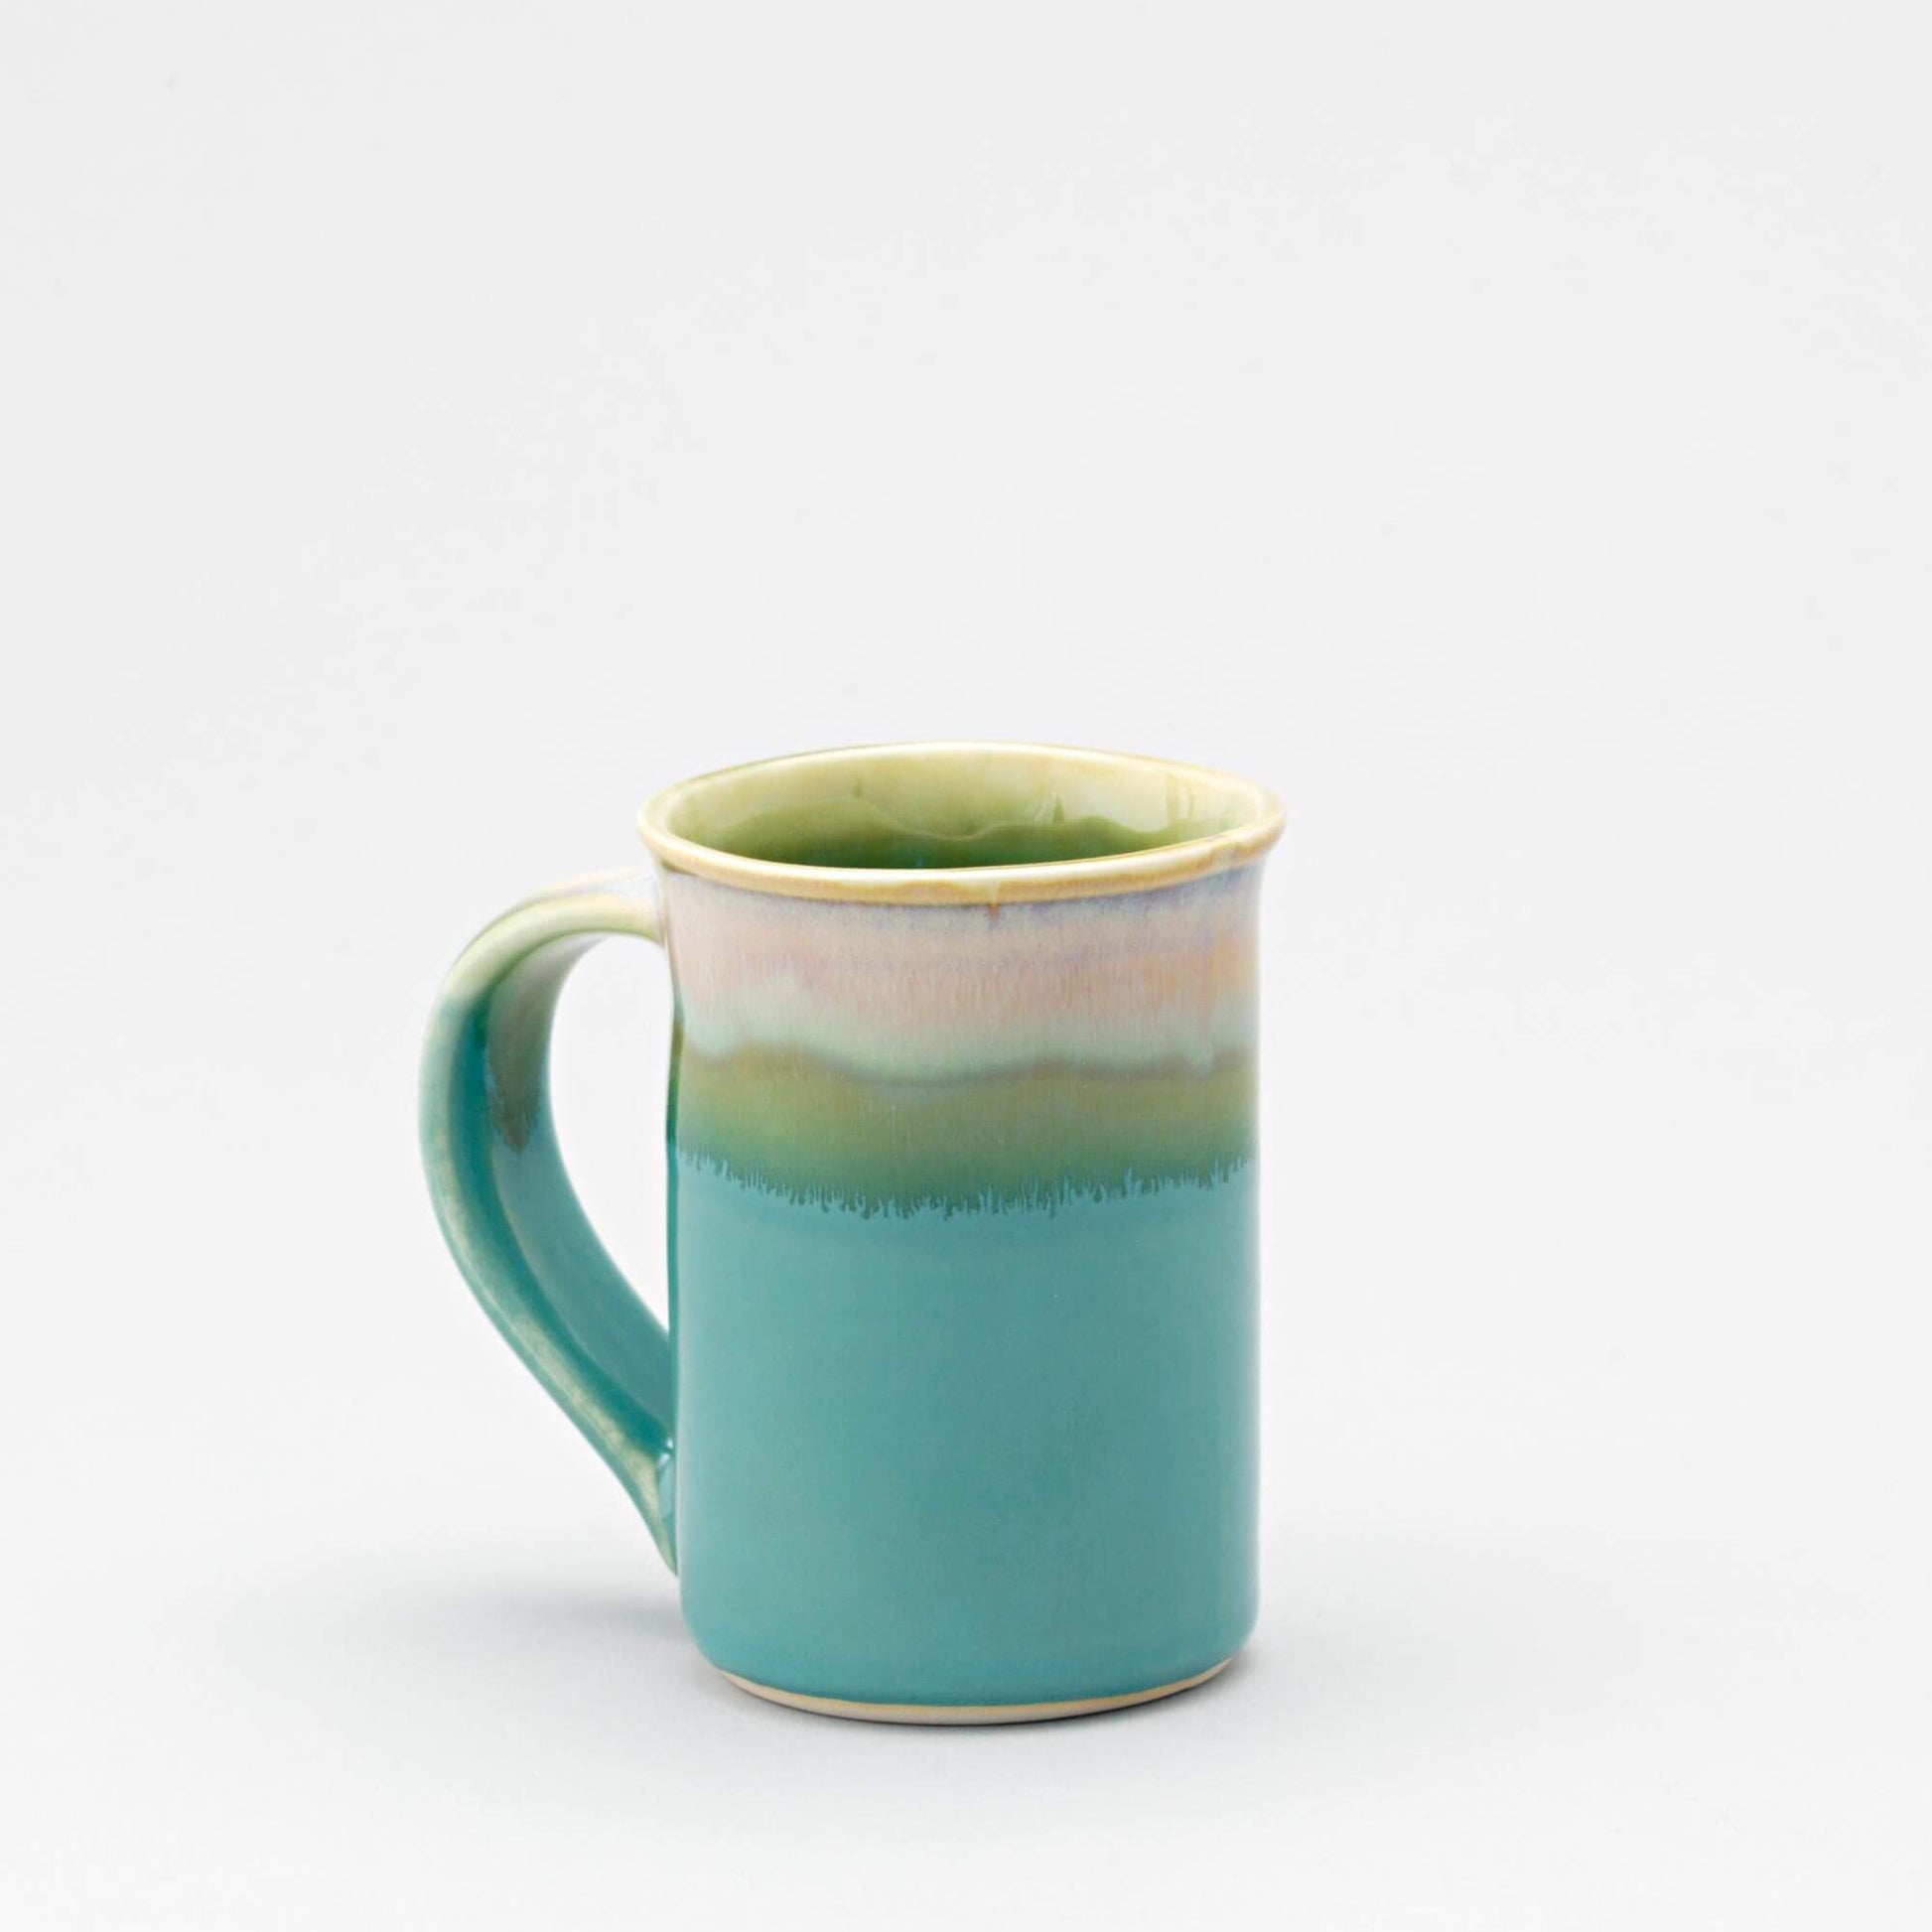 Handmade Pottery Large Mug made by Georgetown Pottery in Maine Green Oribe